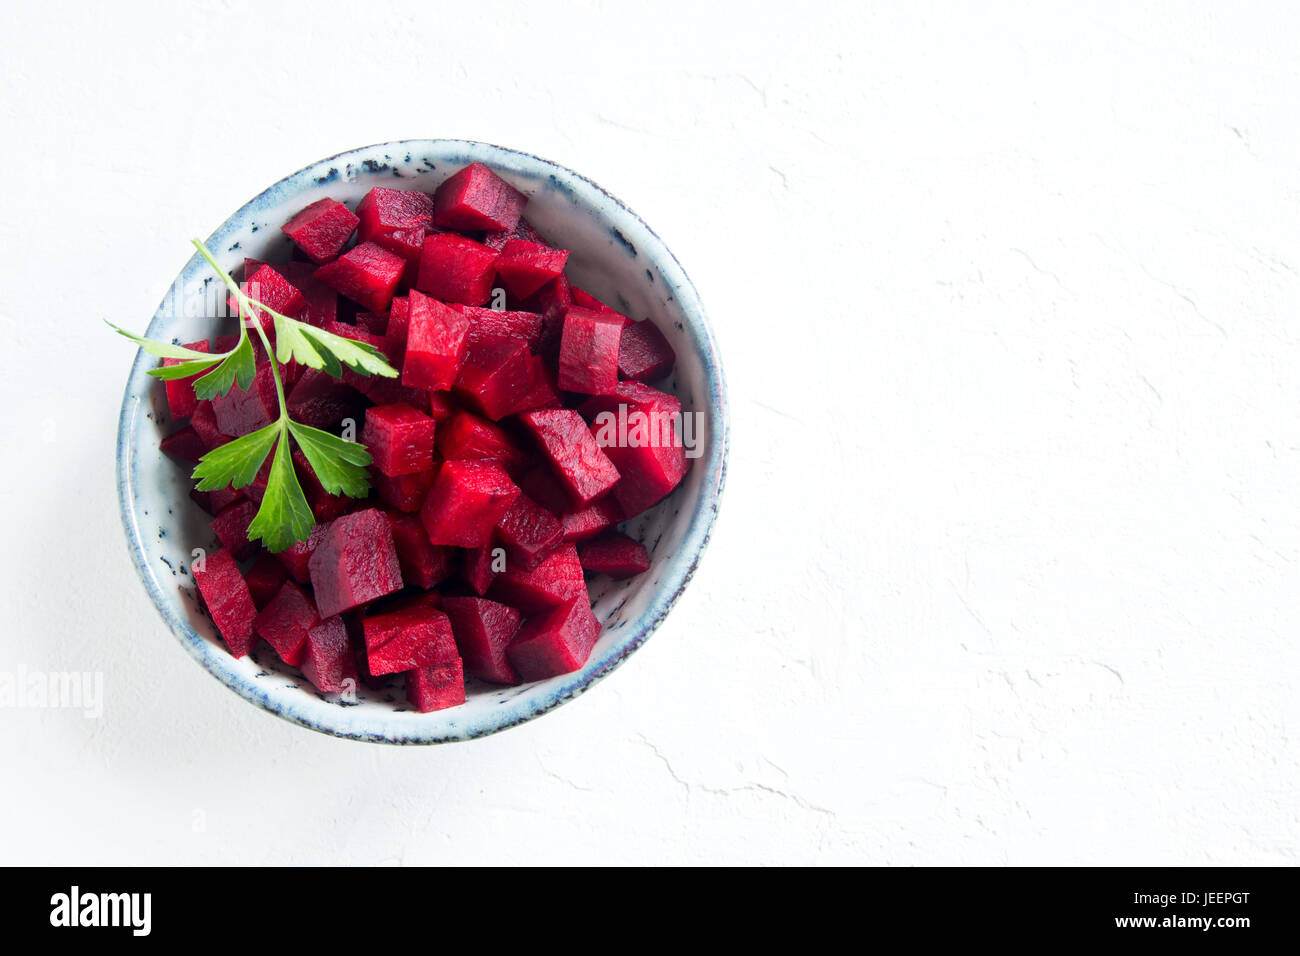 Beetroot (beet) chopped for salad in bowl over white background with copy space. Healthy ingredient for cooking. Stock Photo